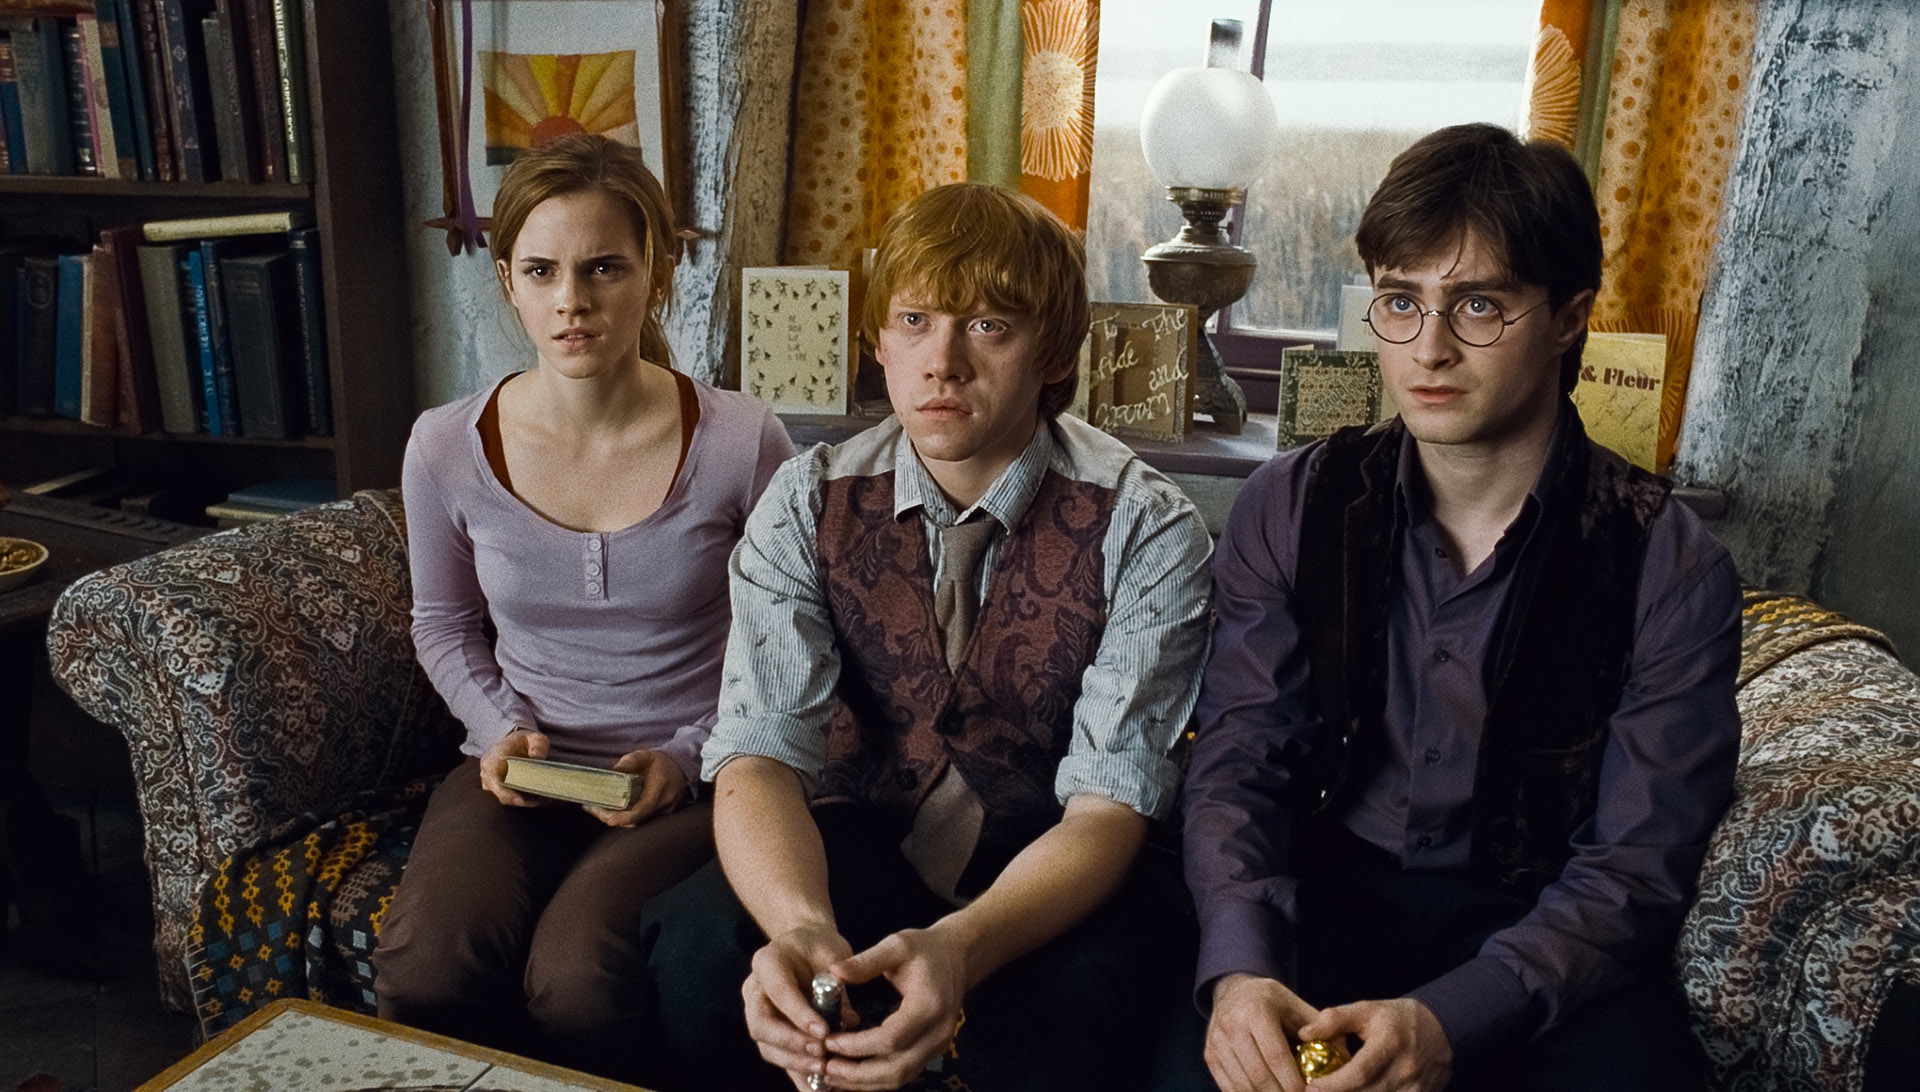 Hermione Granger, Ron Weasley, and Harry Potter sitting together with serious expressions